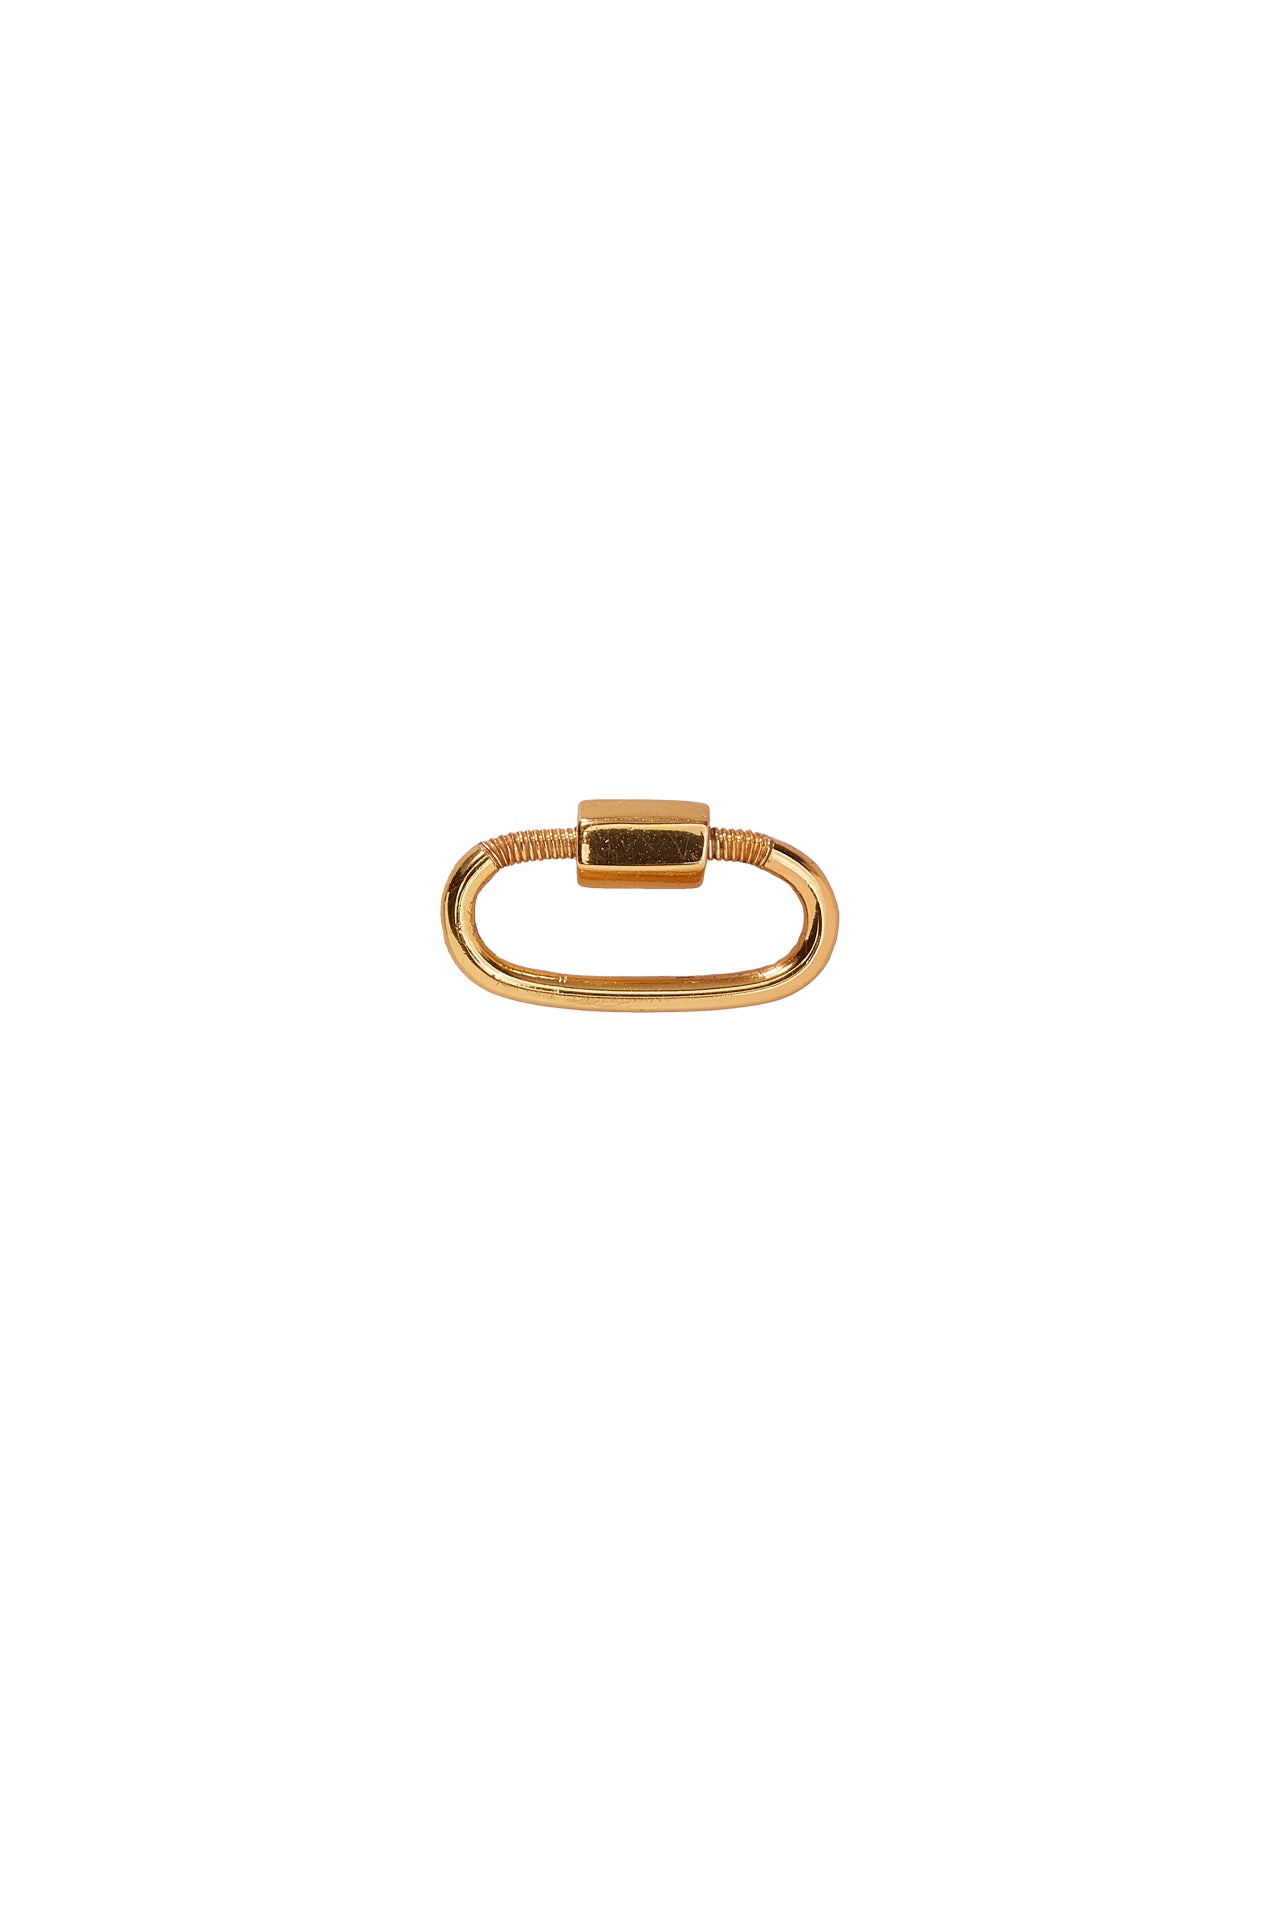 Xzota | Kettingen | Connector | Gold plated